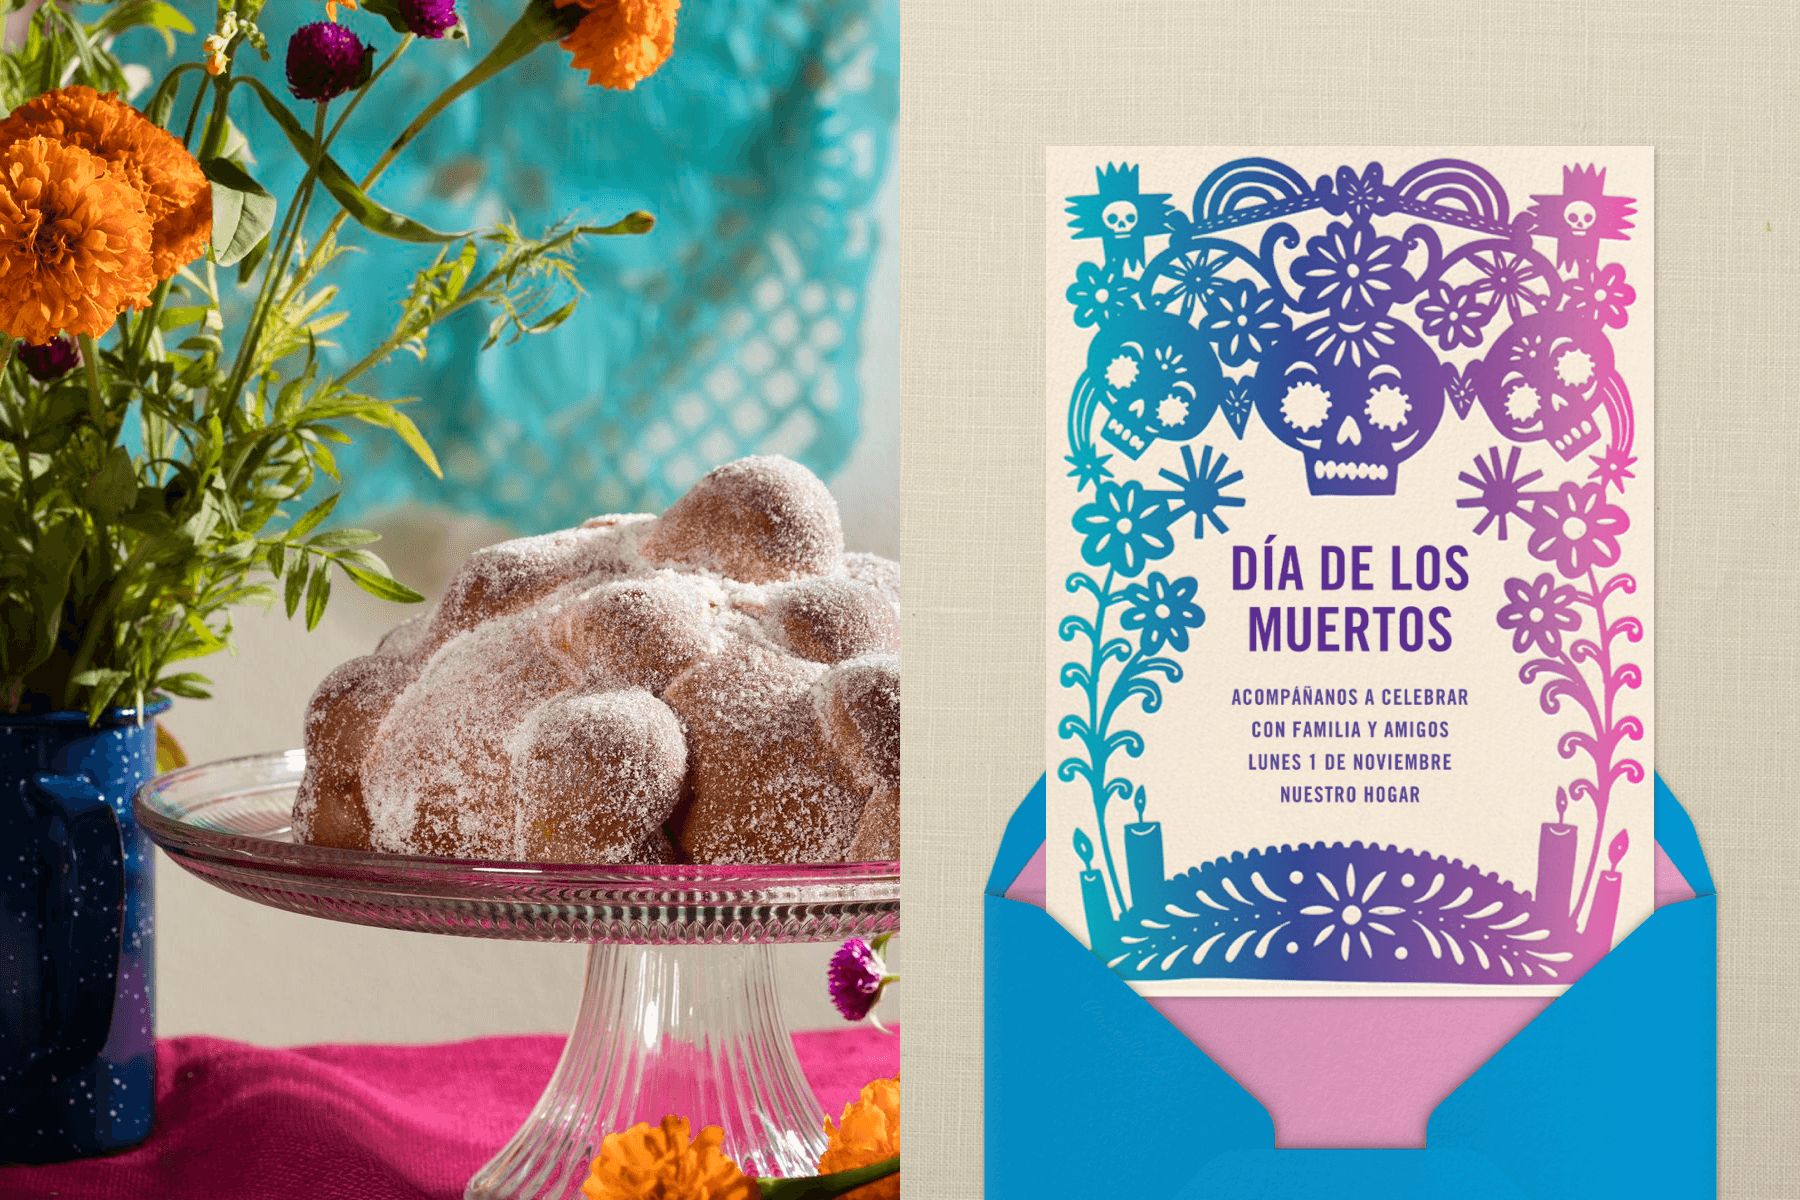 Left: Pan de muerto on a glass cake stand with a vase of flowers; Right: A Dia de Muertos invitation with an illustrated frame of blue and pink flowers and skulls.